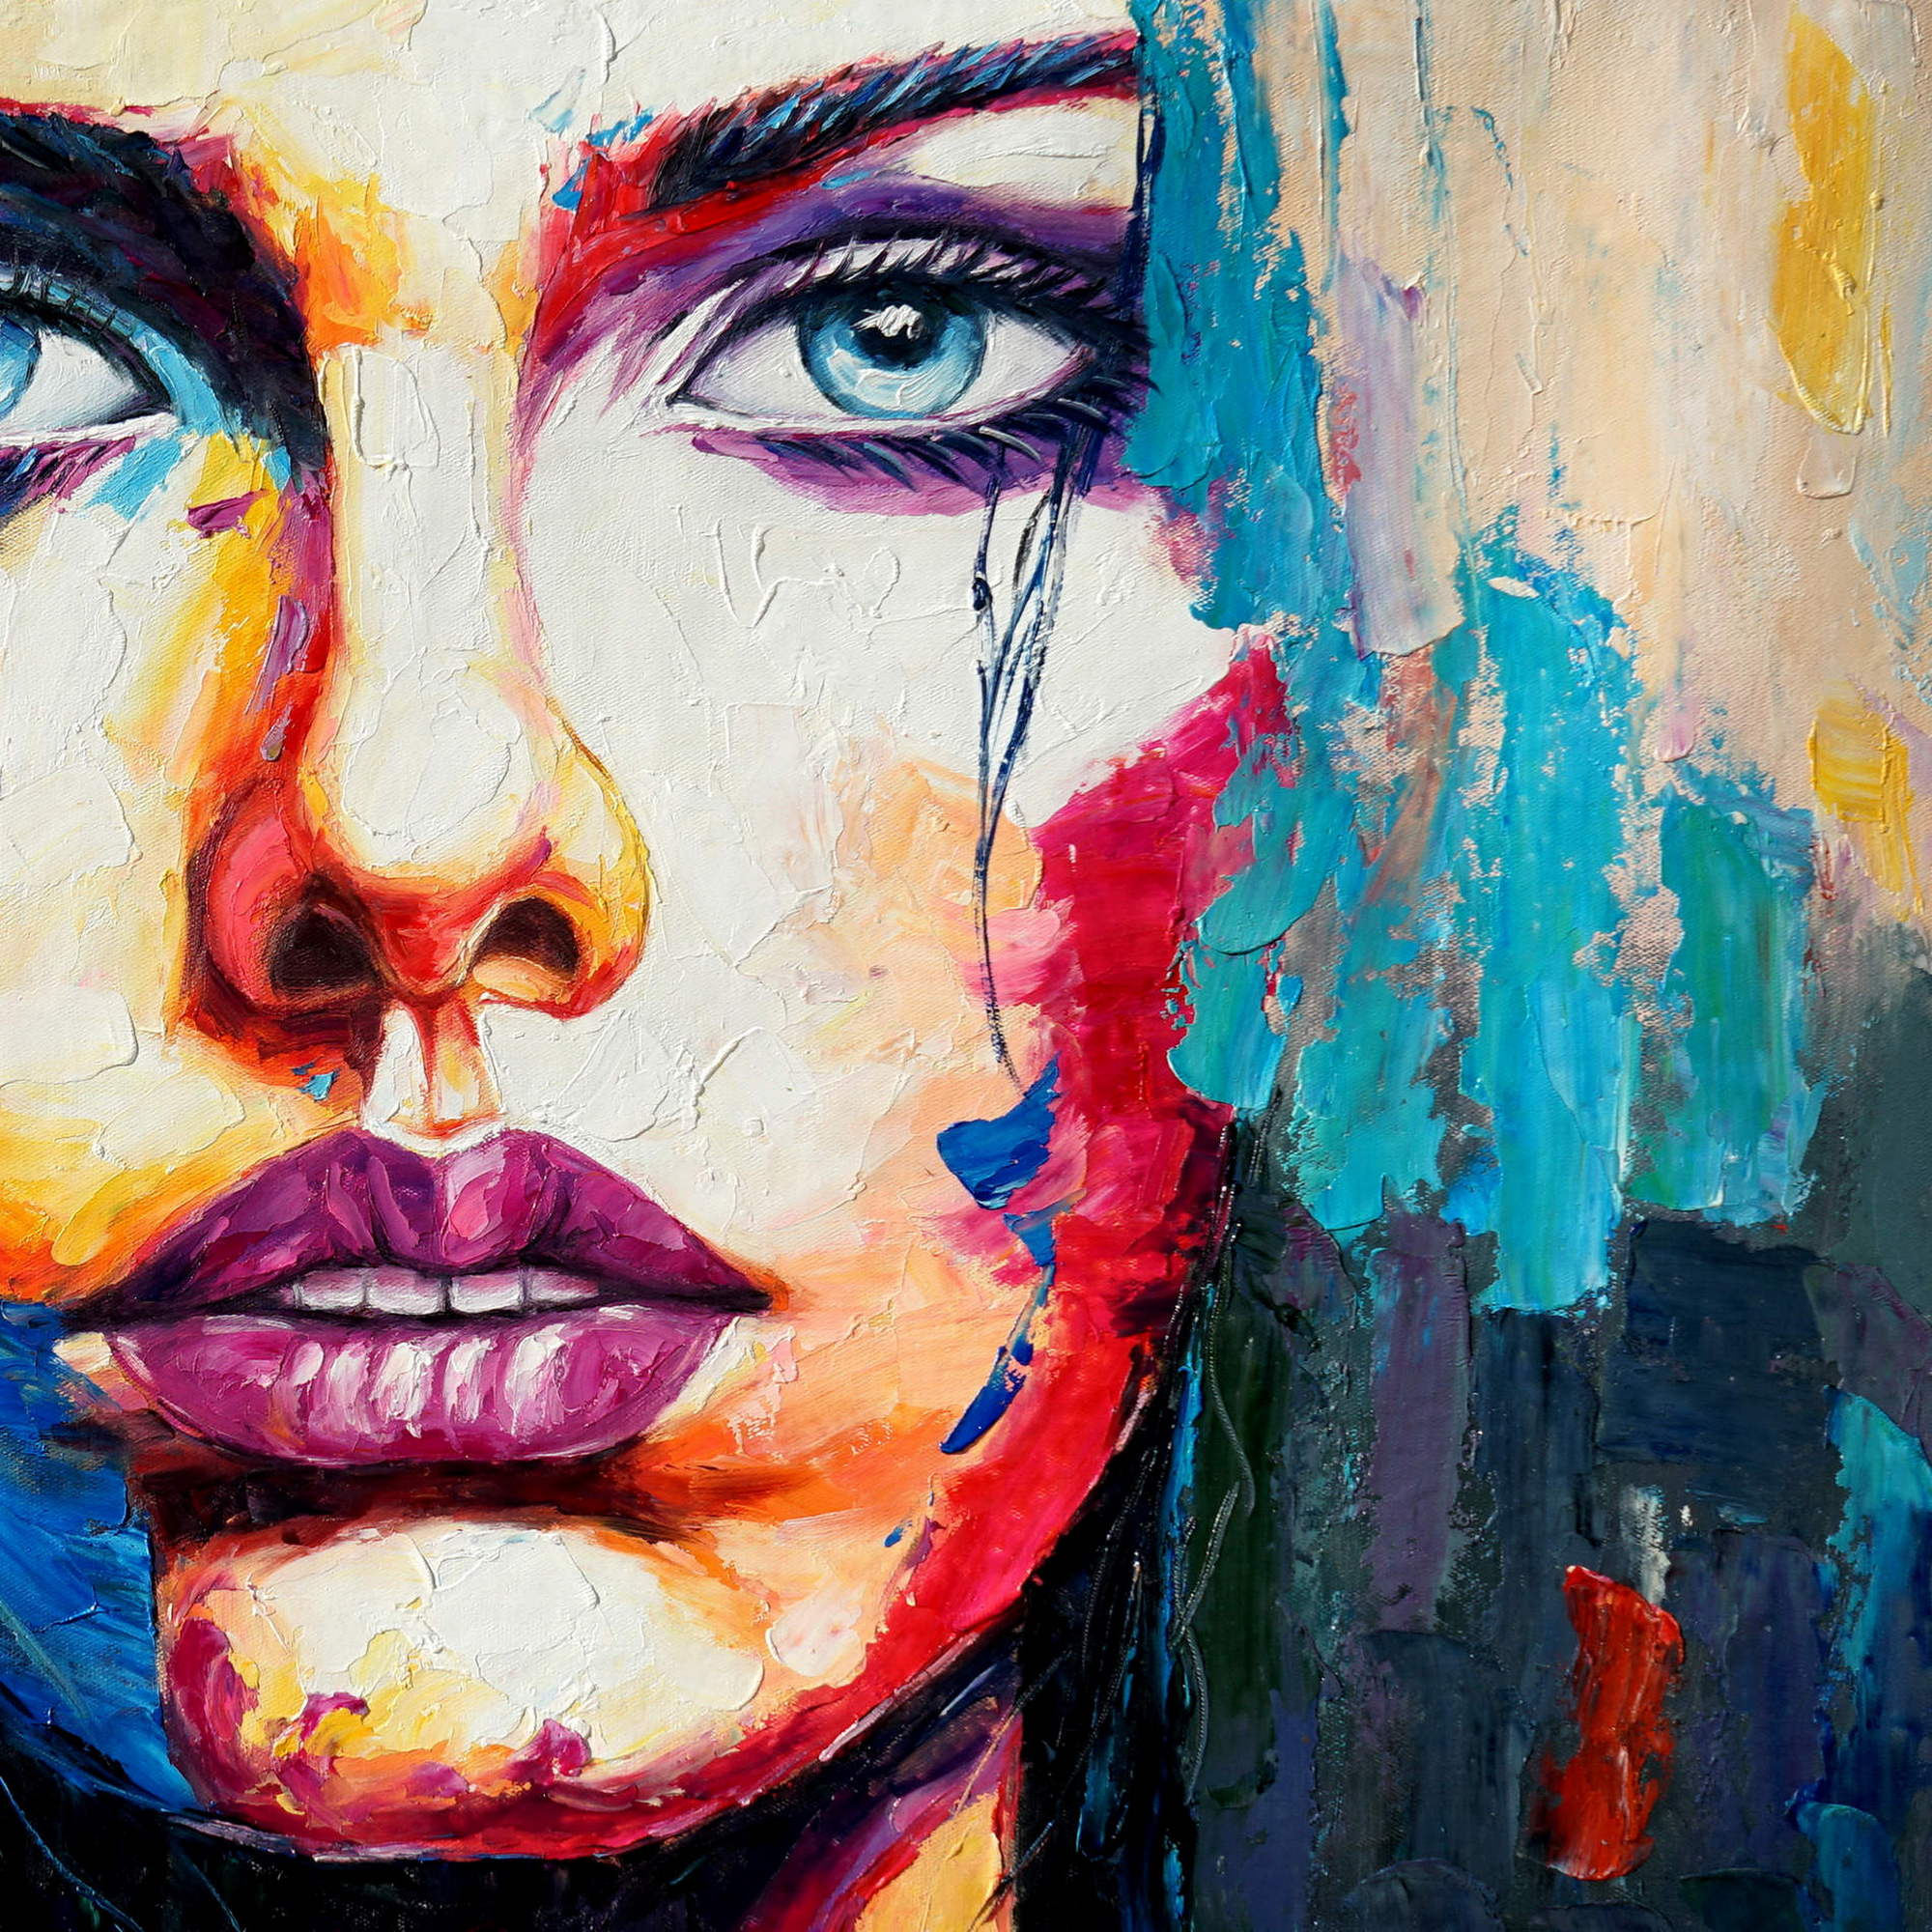 Hand painted Abstract Woman Portrait 60x120cm